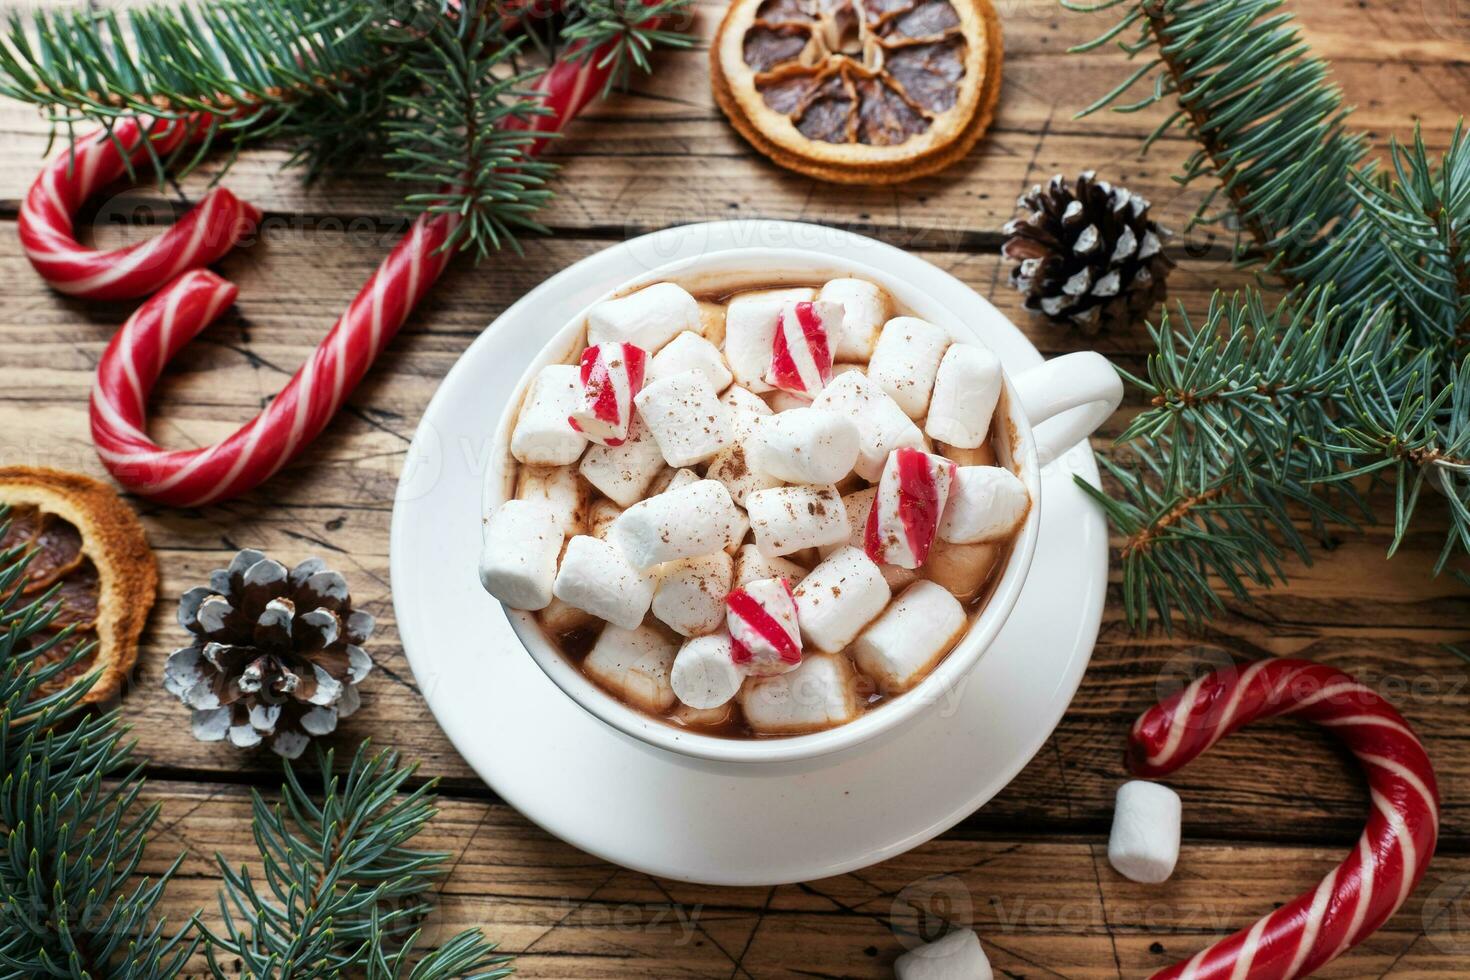 A Cup of hot chocolate with marshmallows. Christmas tree and decorations, cane caramel and oranges nuts Wooden background photo